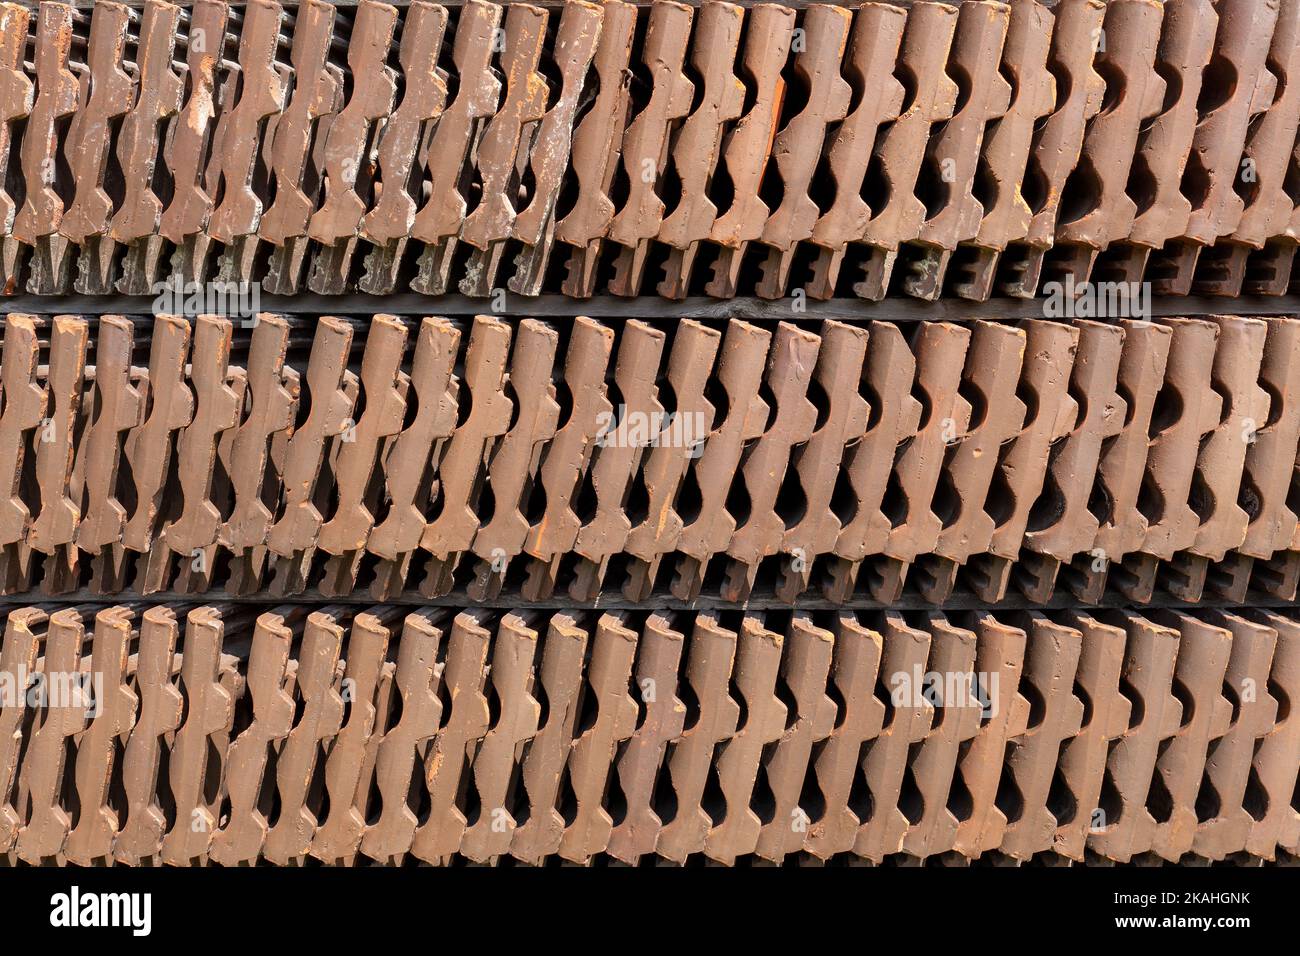 Three rows of upright old roof tiles in close-up Stock Photo